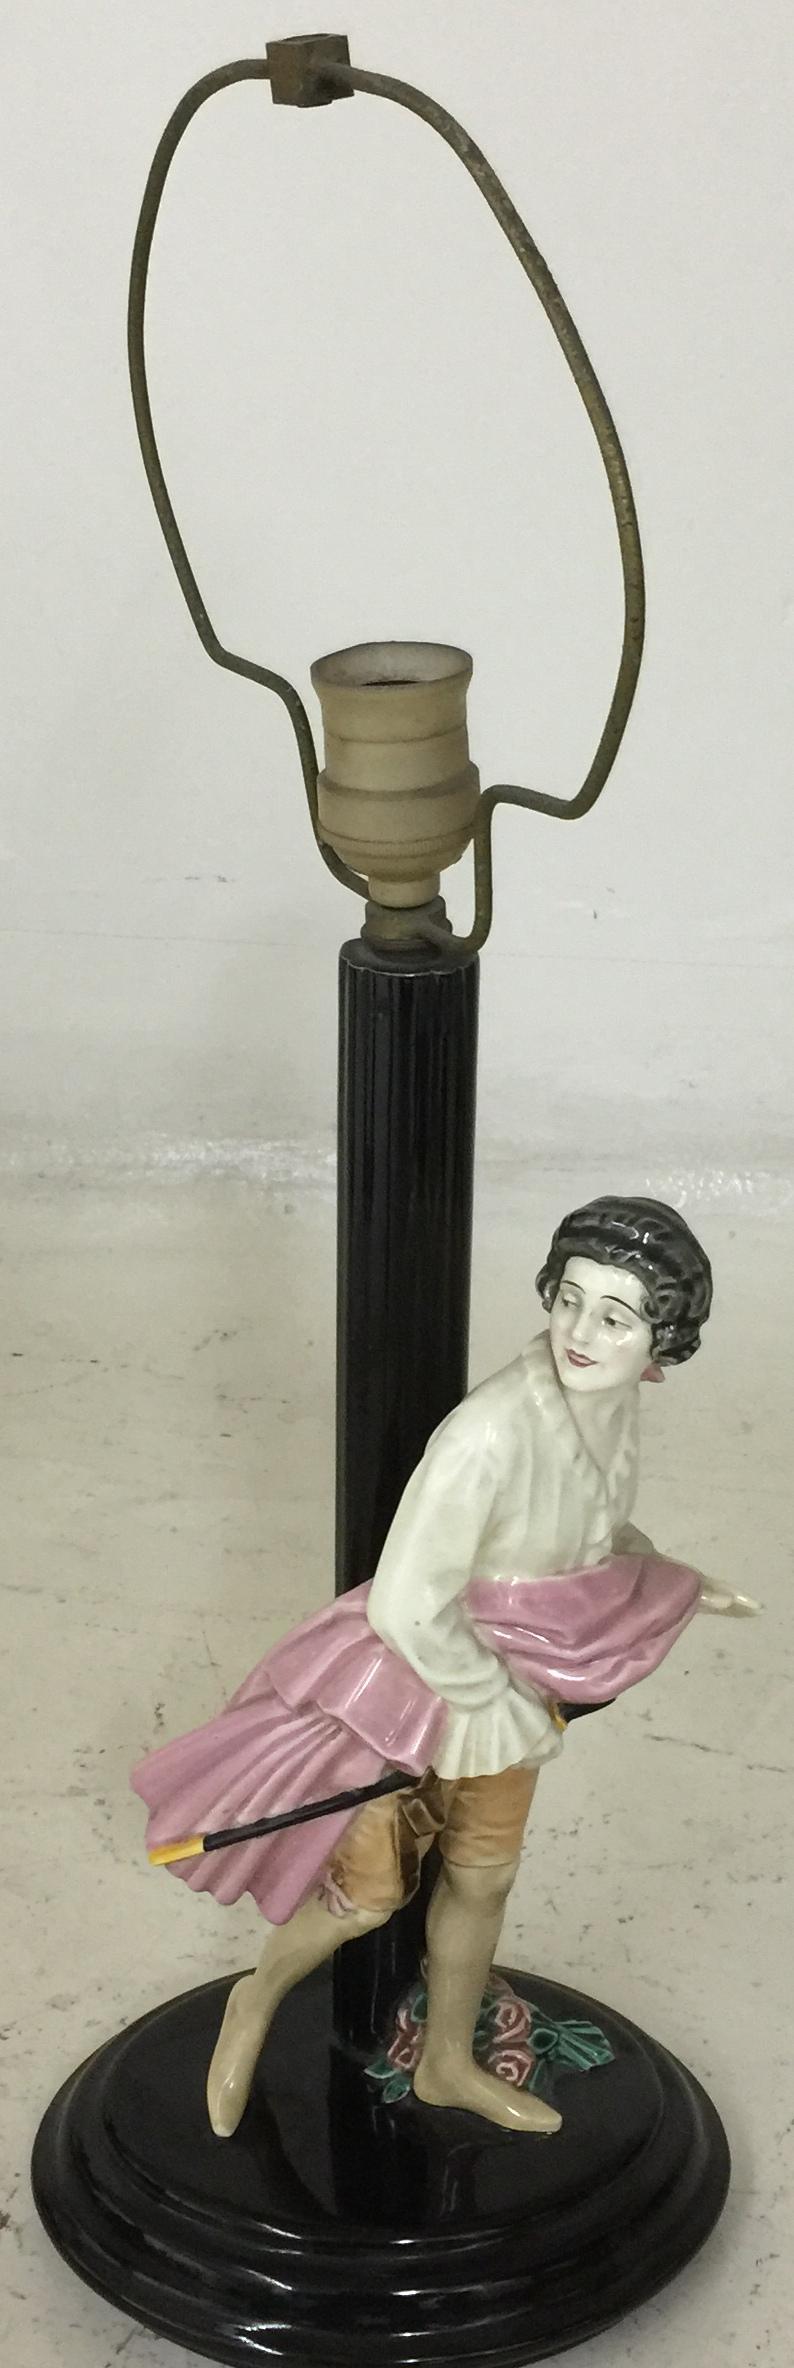 Art deco Table Lamp, Sing: Made in Austria 